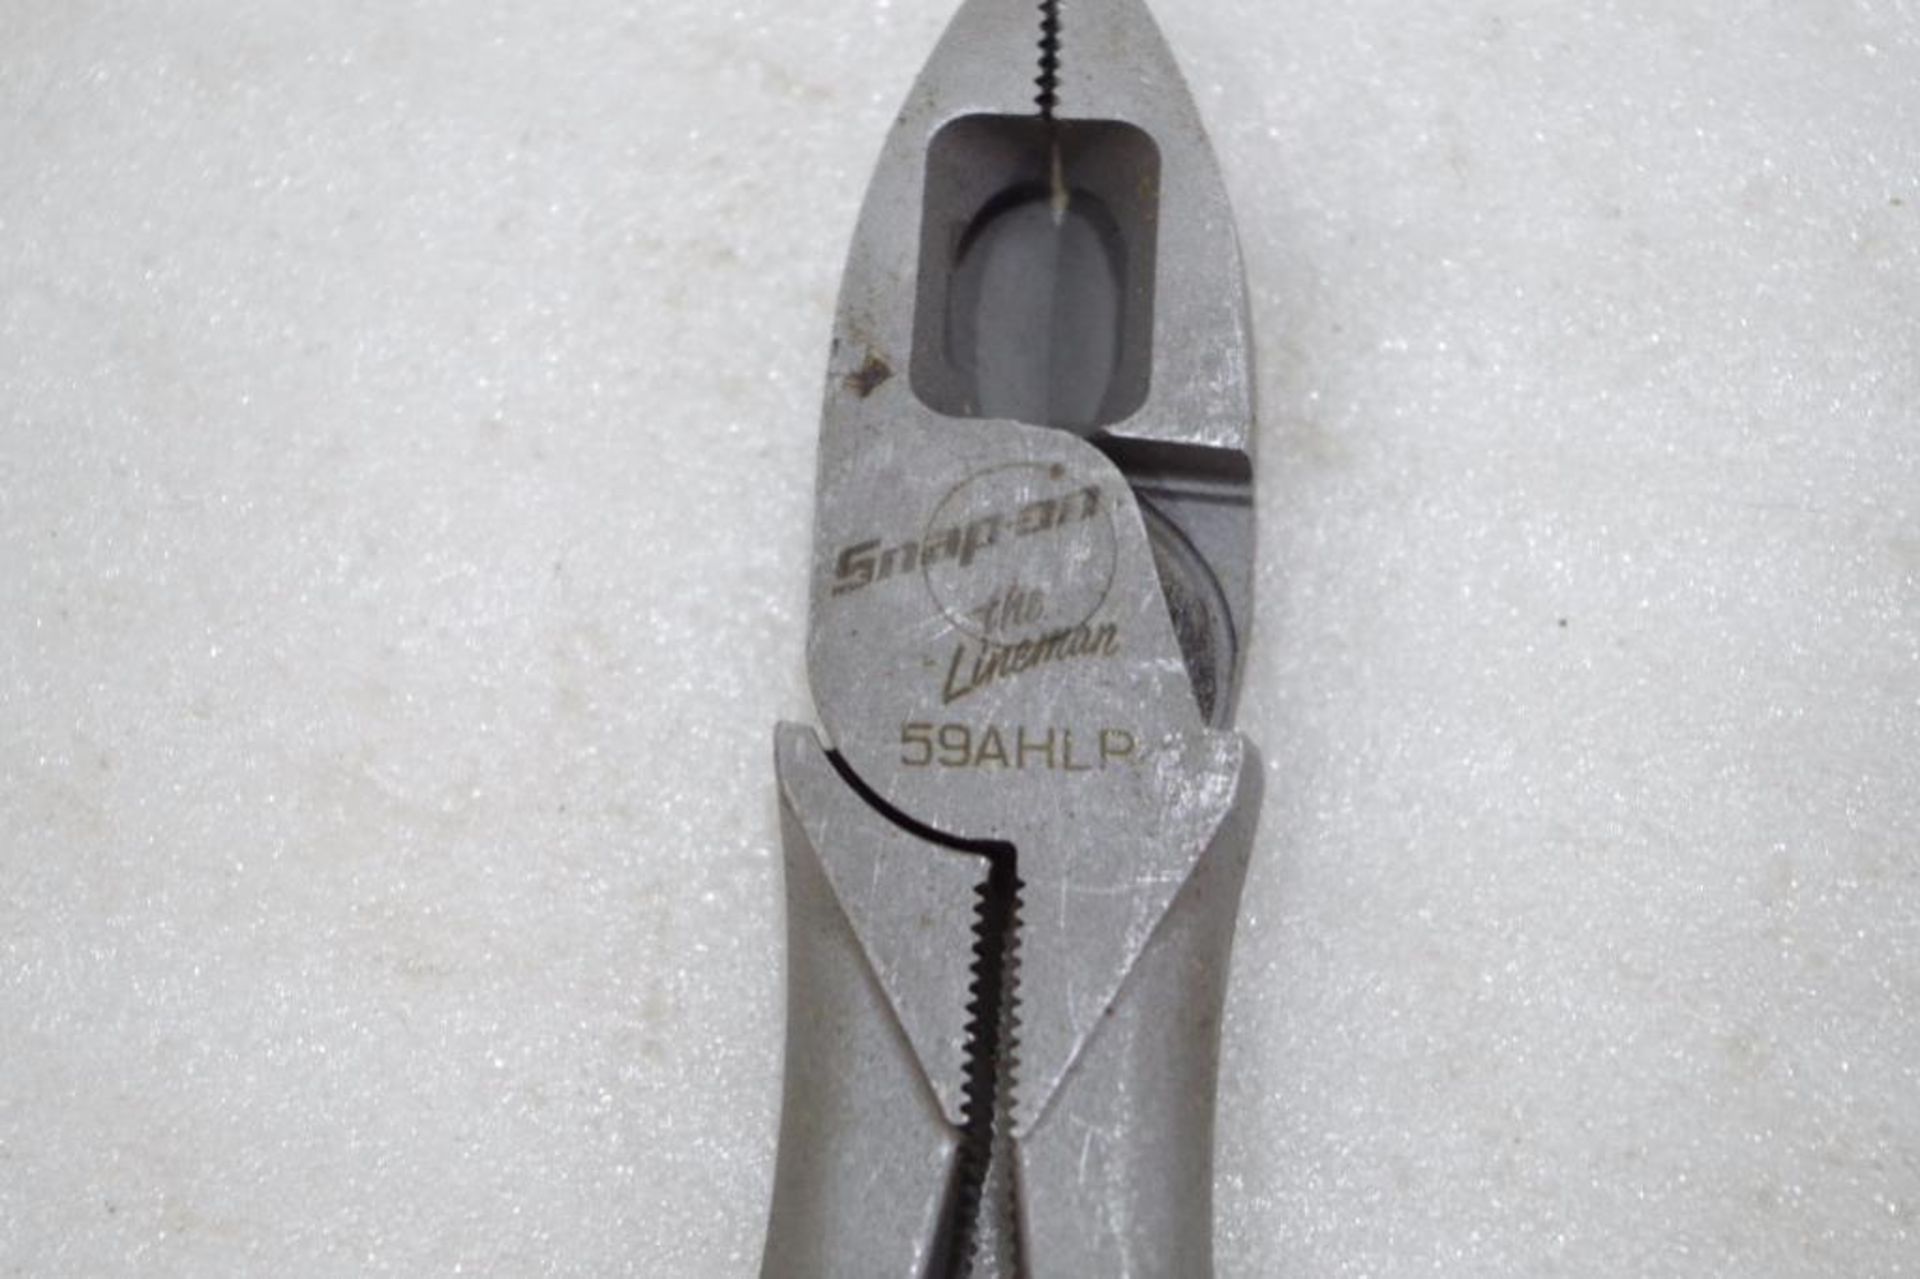 NEW SNAP-ON Lineman's Pliers, M/N 59AHLP, Made in USA - Image 3 of 5